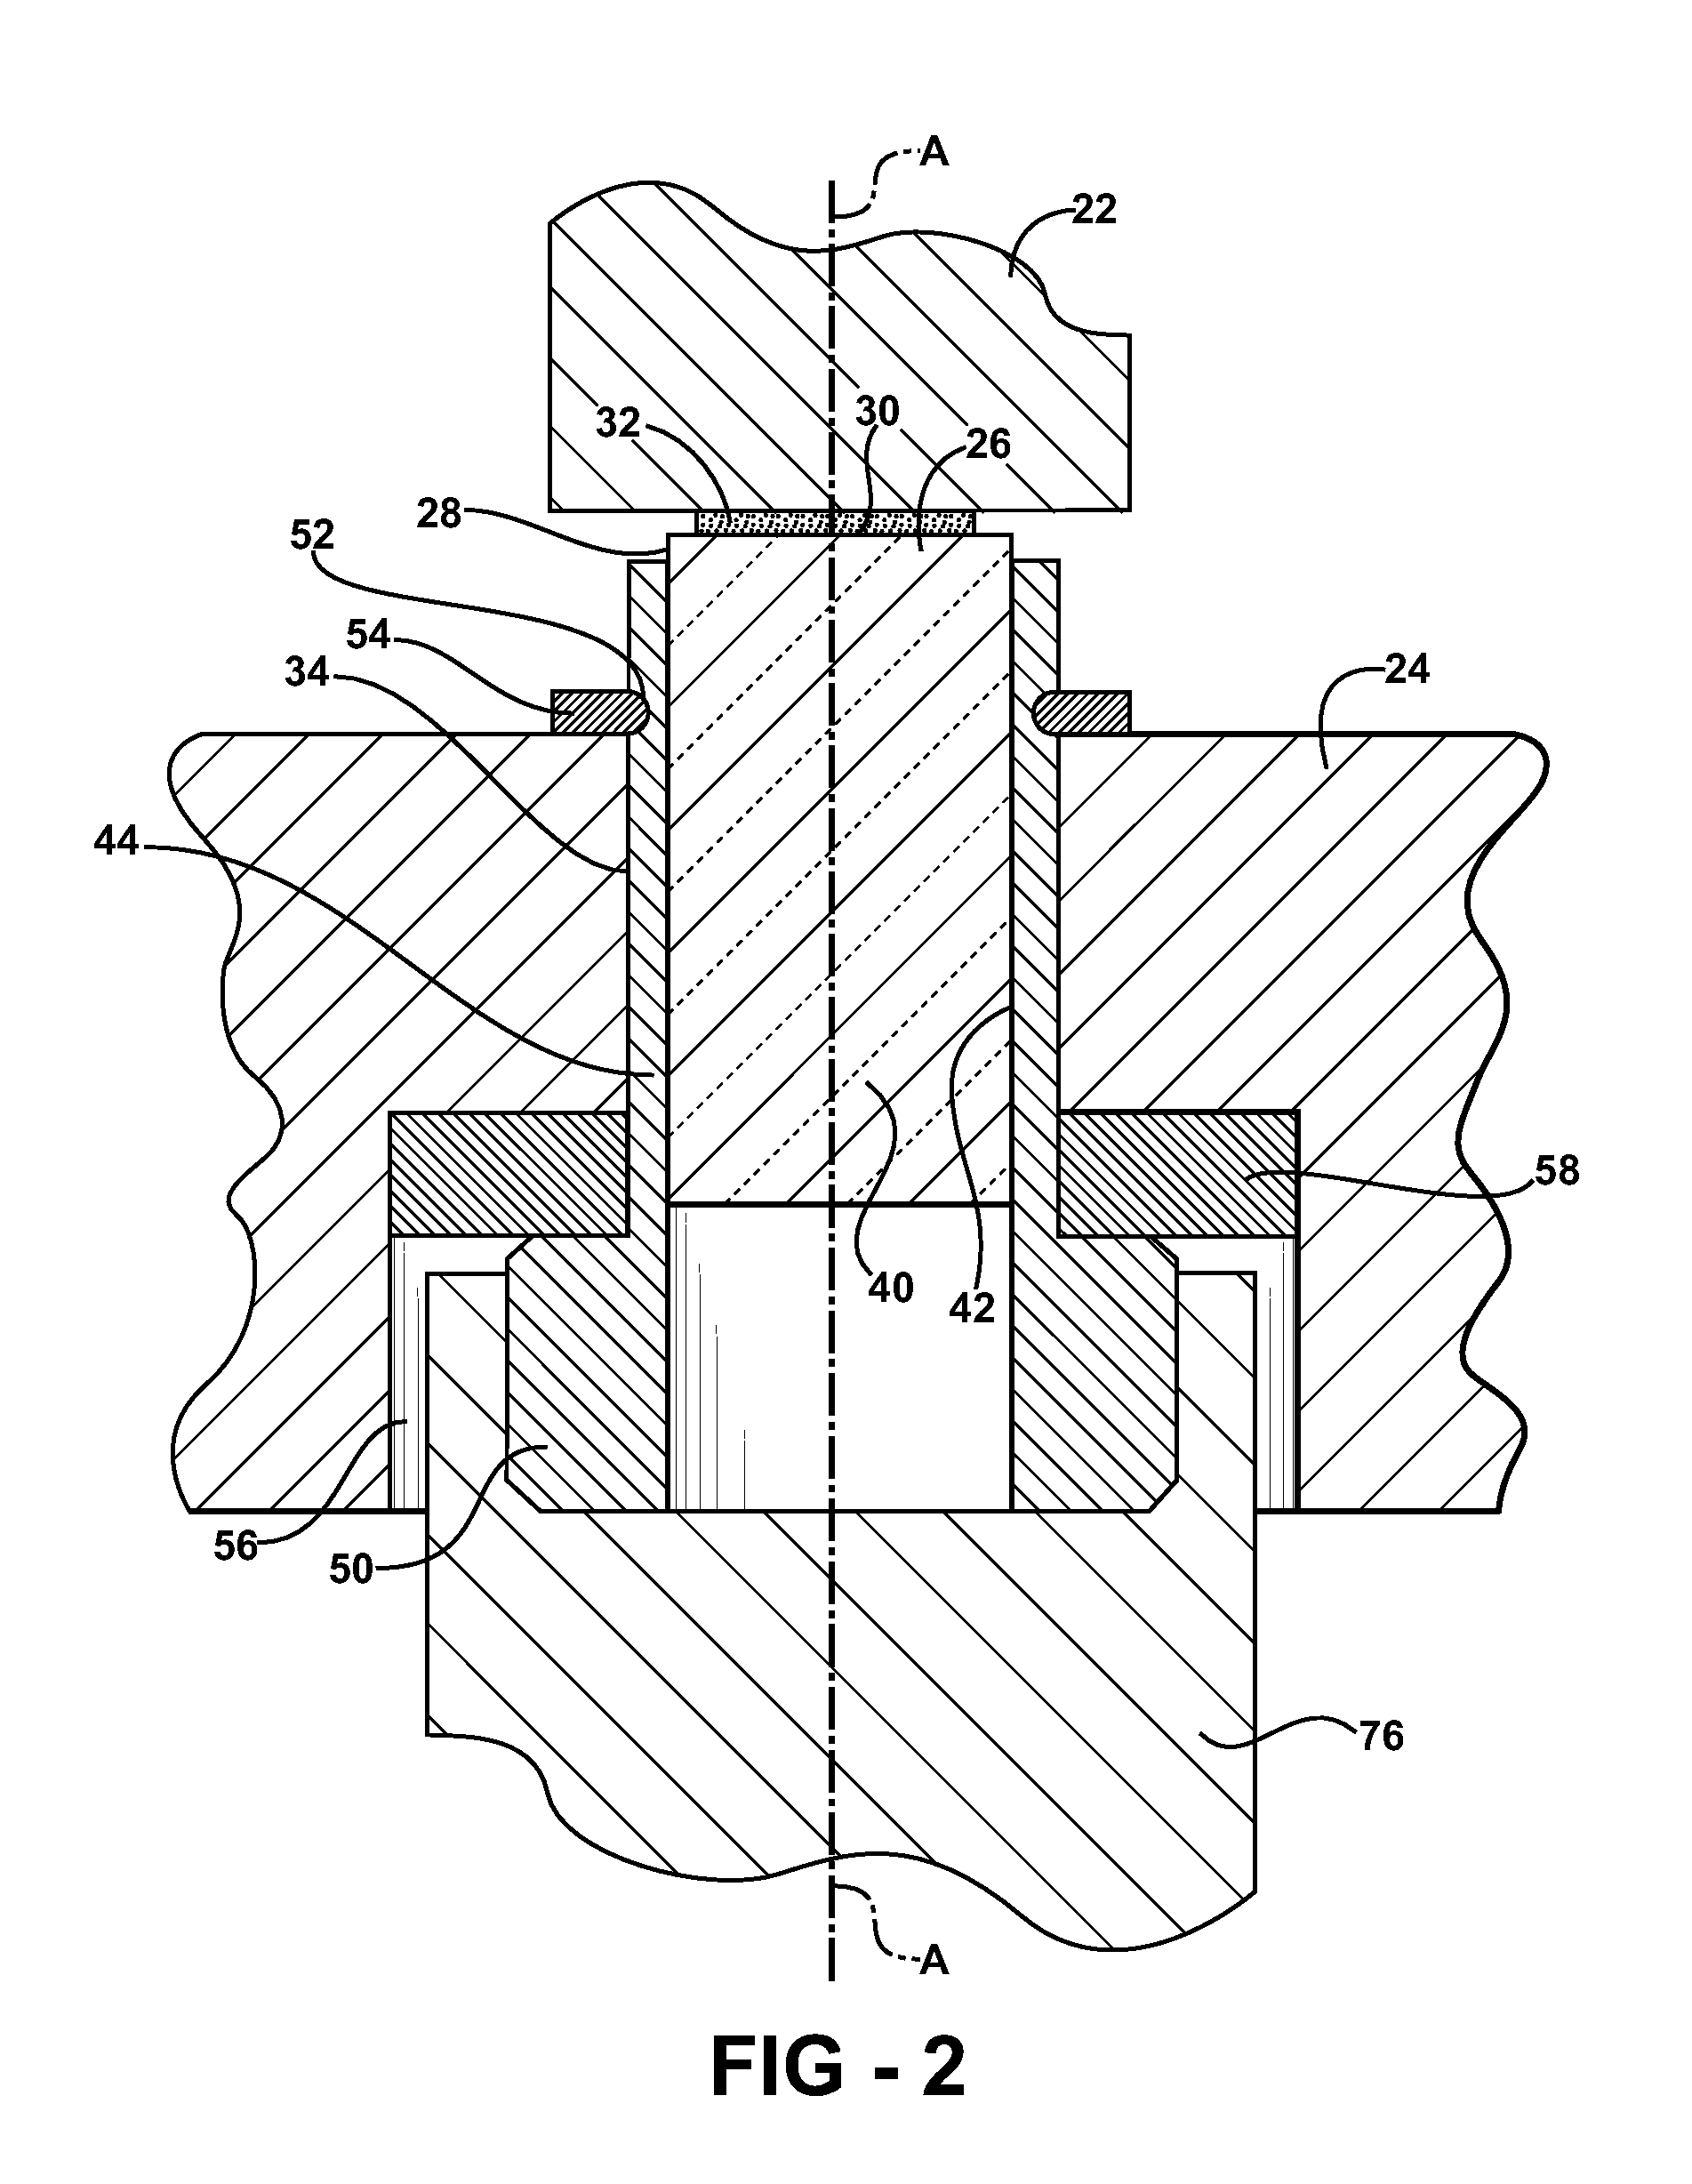 Fixture and method of holding and debonding a workpiece with the fixture